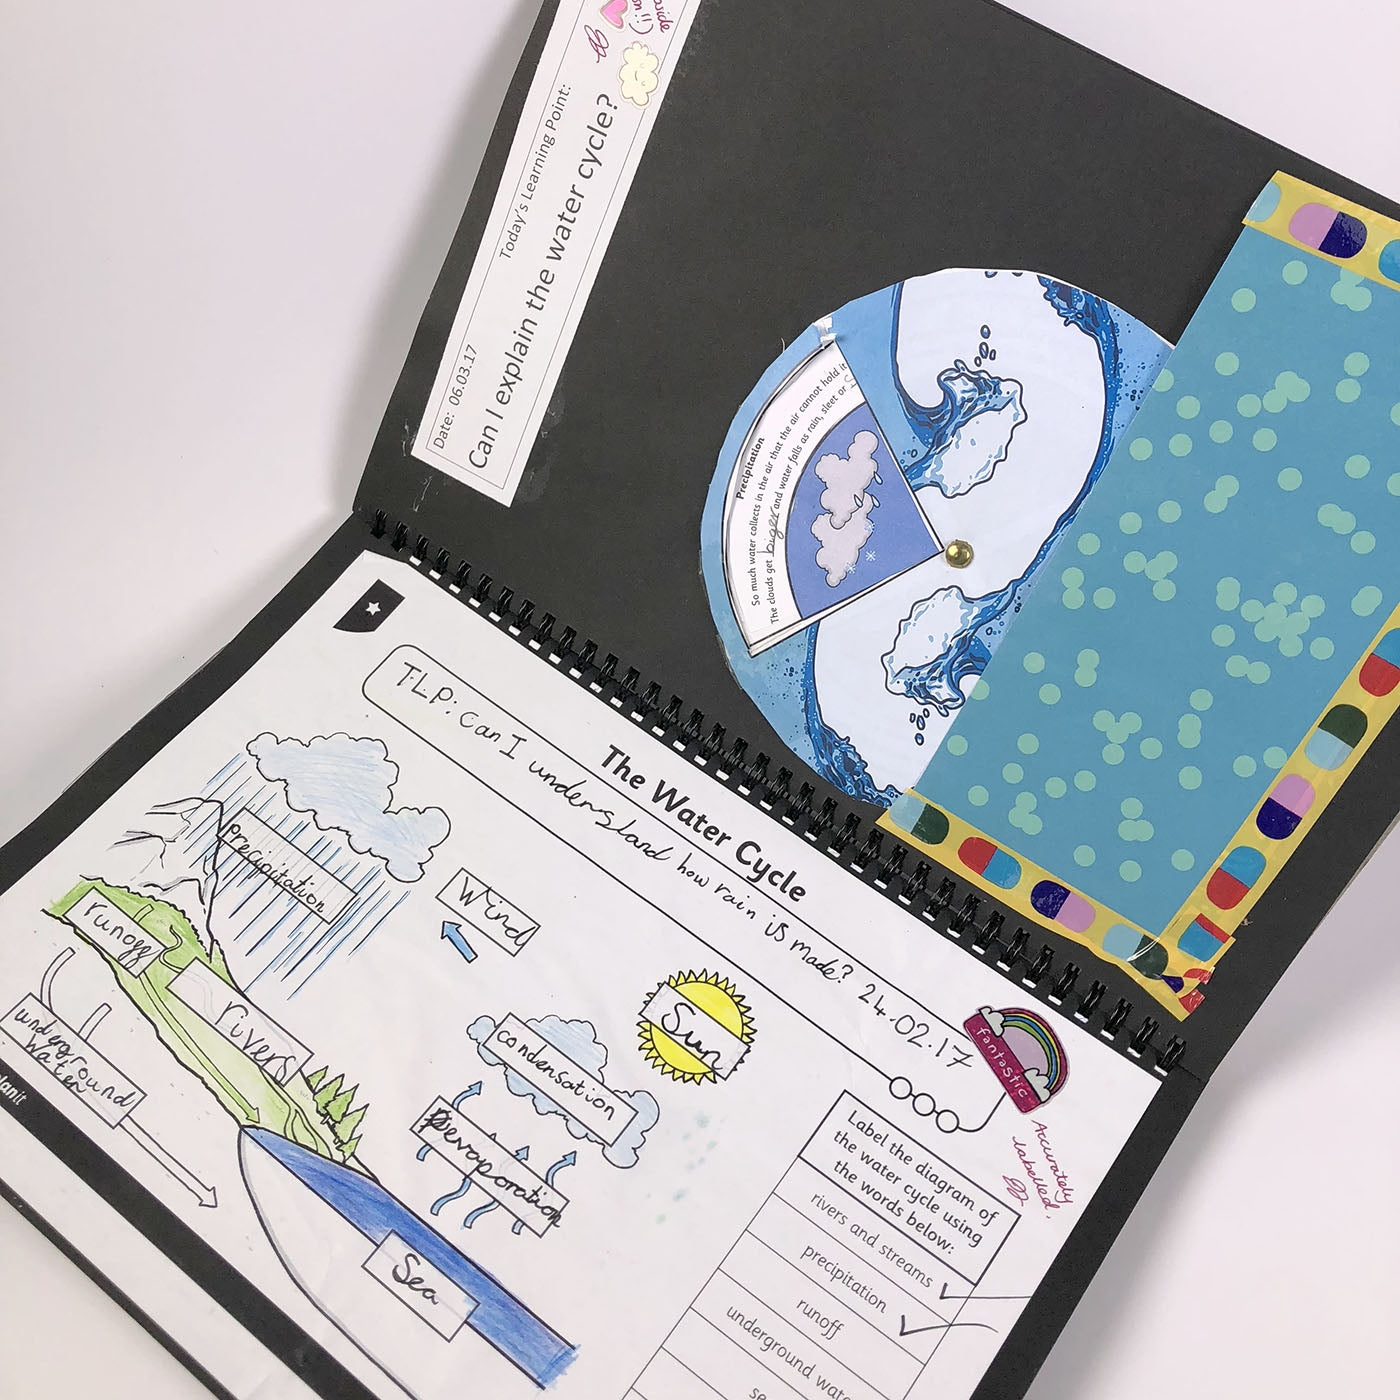 Scrap Books perfect for displaying Topic Work